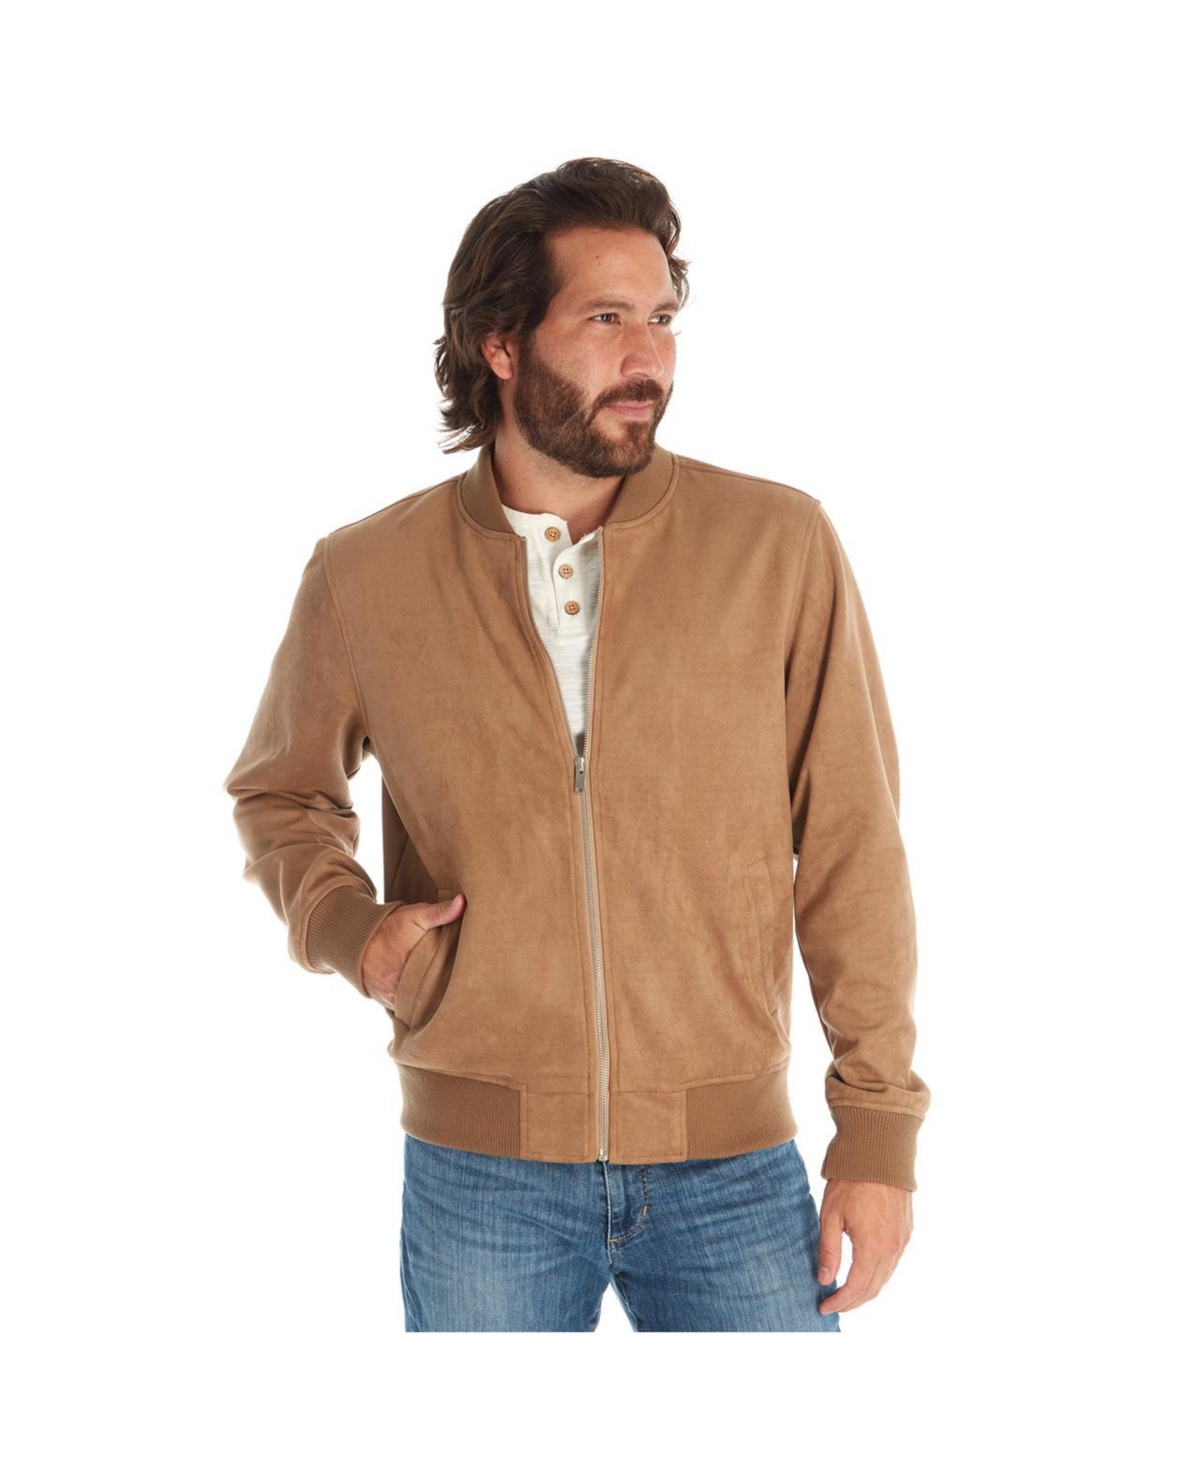 Clothing Men's Timeless Faux Suede Bomber Jacket - Light brown